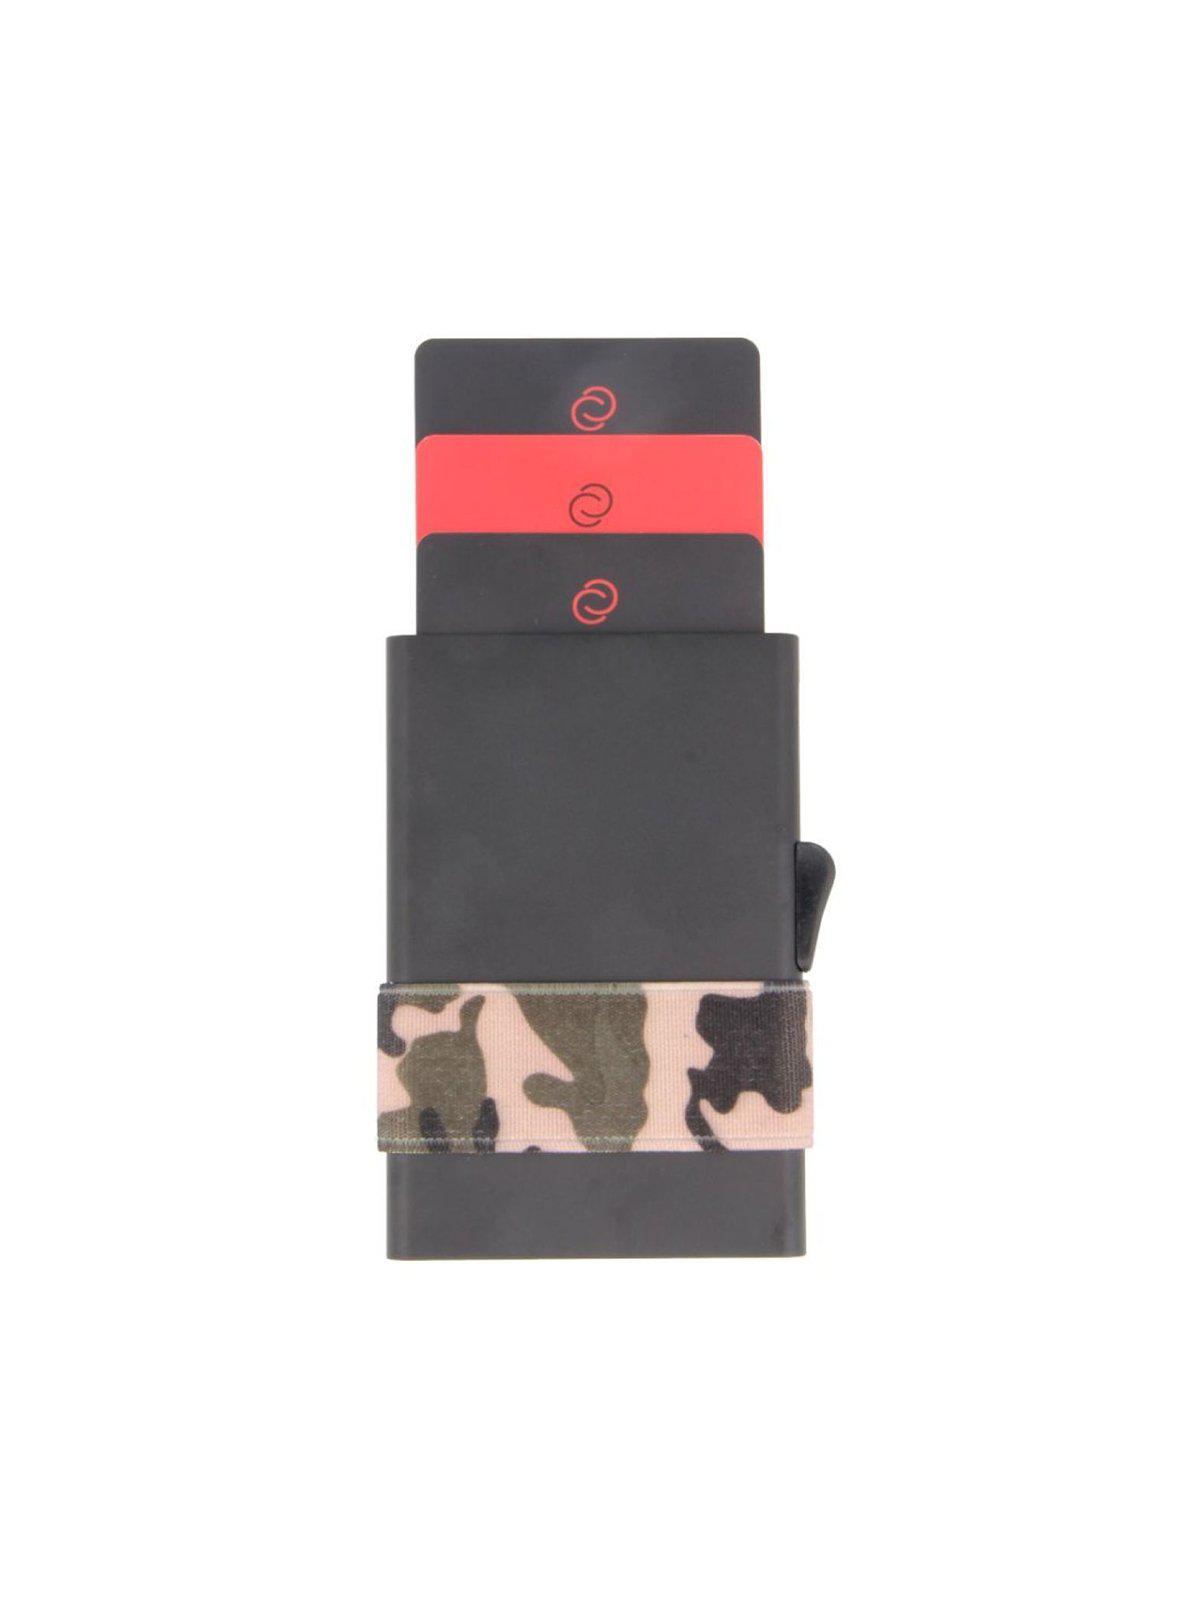 C-Secure Aluminium RFID Cardholder With Money Band Black Camo - MORE by Morello Indonesia